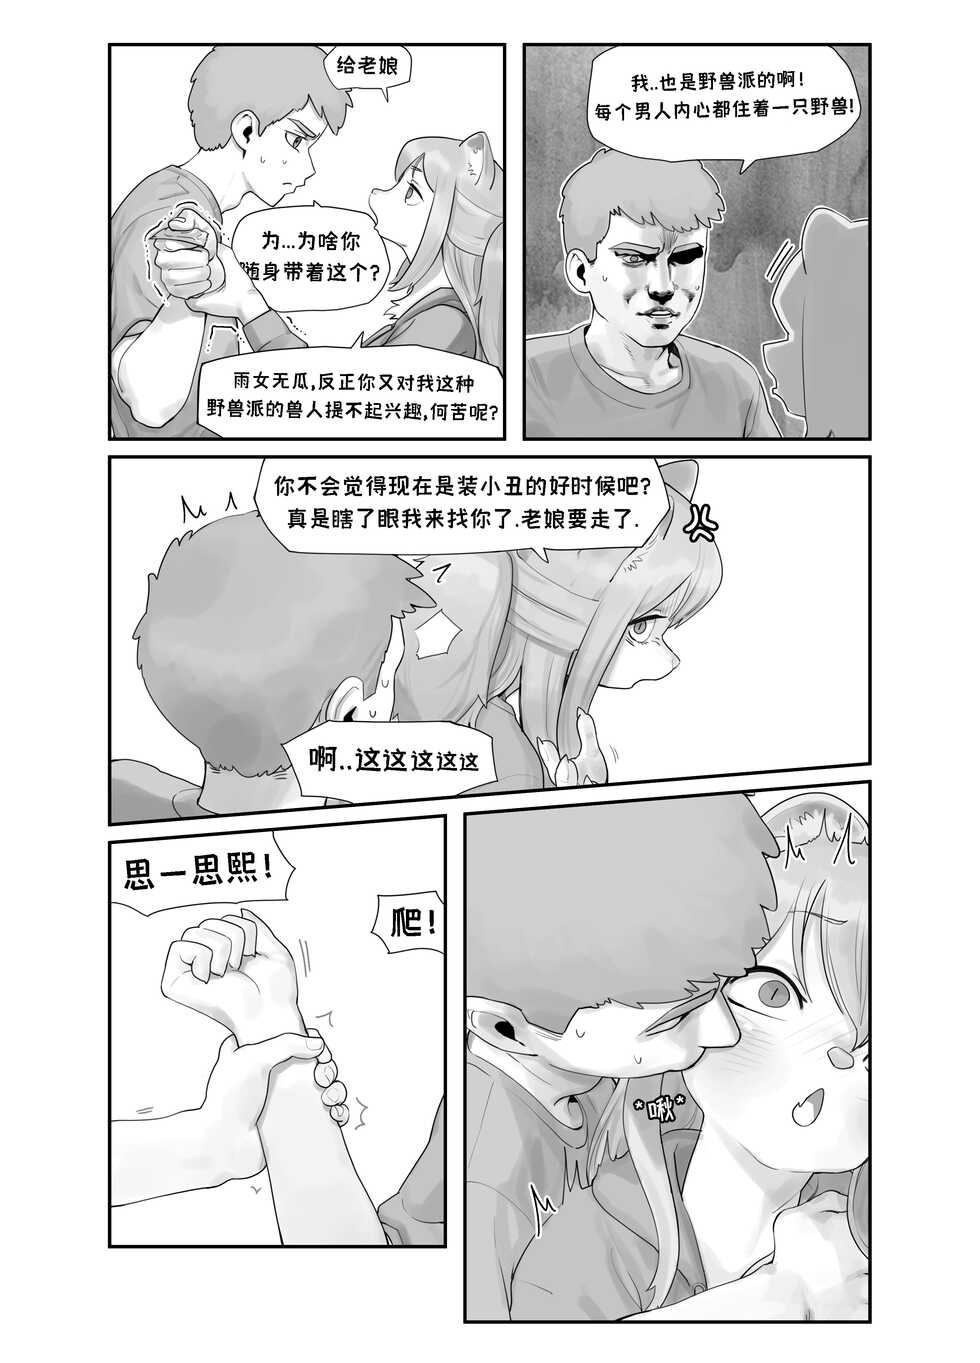 [Gudl] A Suspiciously Erotic Childhood Friend (Pixiv)《可疑瑟瑟青梅竹马》 [Chinese] (Ongoing) - Page 3